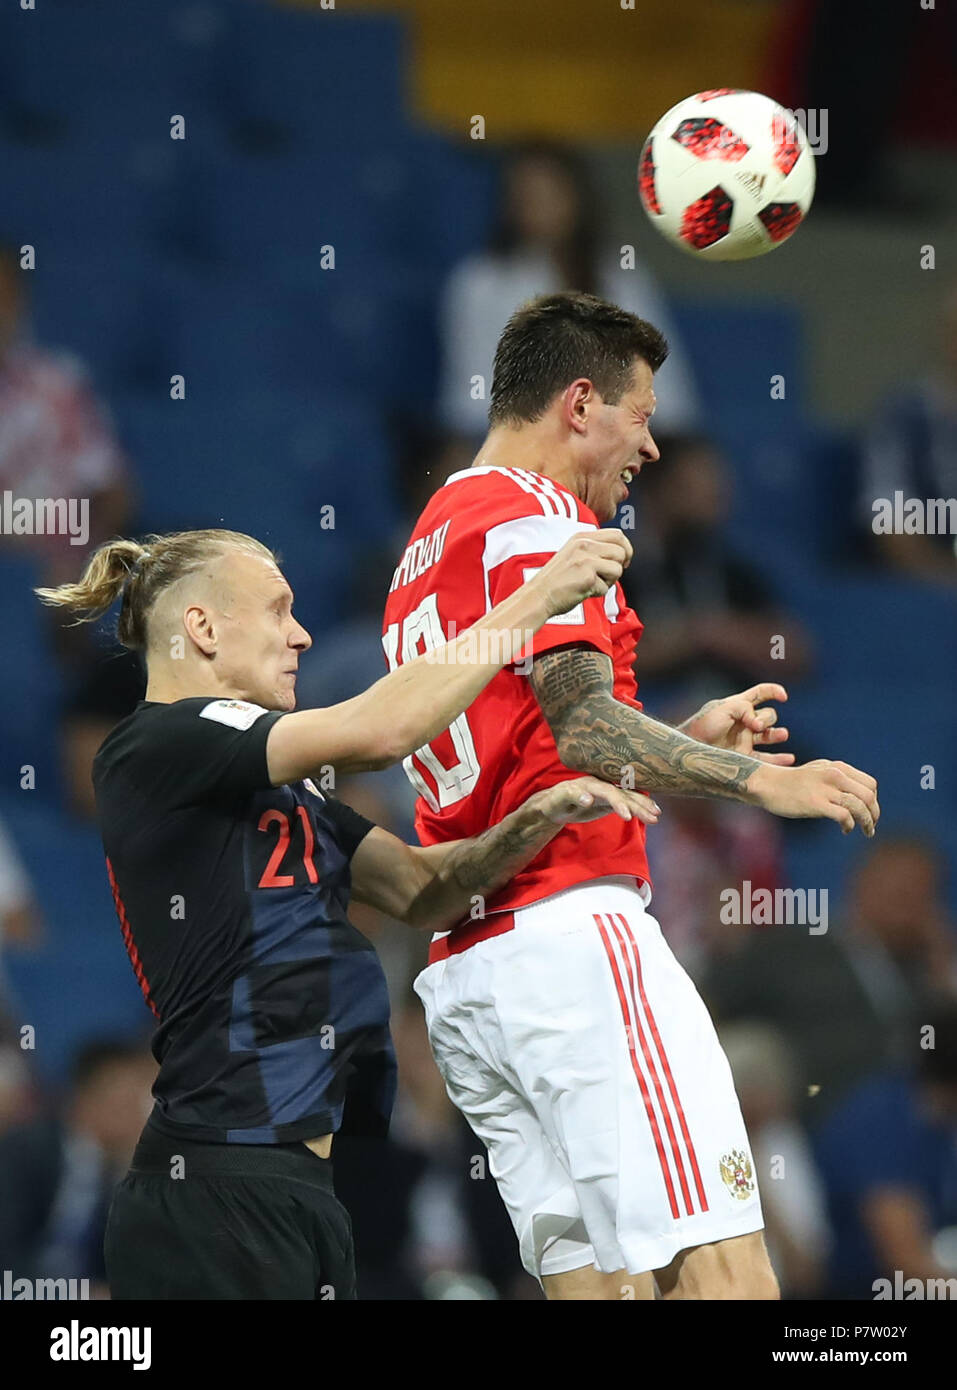 Sochi, Russia. 7th July, 2018. Fedor Smolov (R) of Russia competes for a header with Domagoj Vida of Croatia during the 2018 FIFA World Cup quarter-final match between Russia and Croatia in Sochi, Russia, July 7, 2018. Credit: Wu Zhuang/Xinhua/Alamy Live News Stock Photo